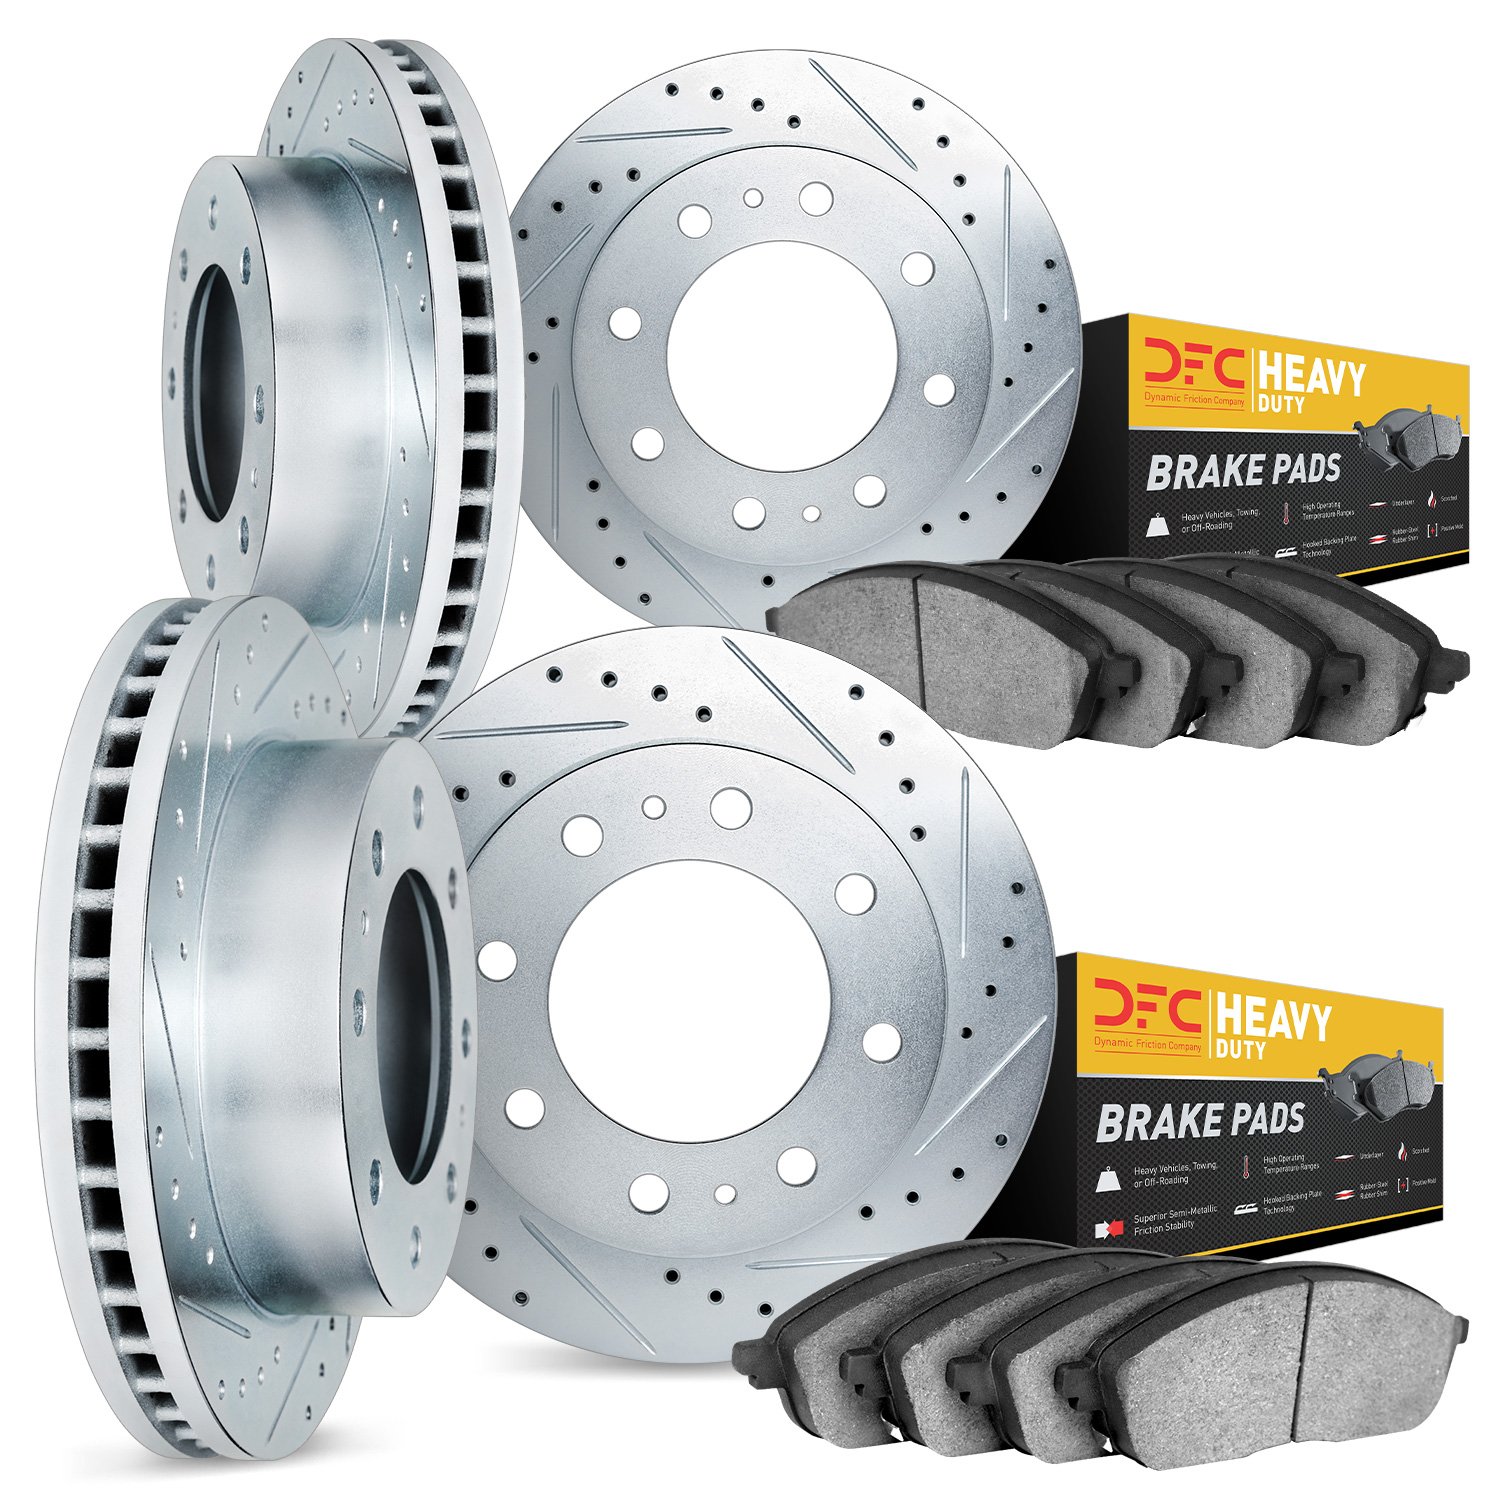 7204-48153 Drilled/Slotted Rotors w/Heavy-Duty Brake Pads Kit [Silver], 2003-2008 GM, Position: Front and Rear